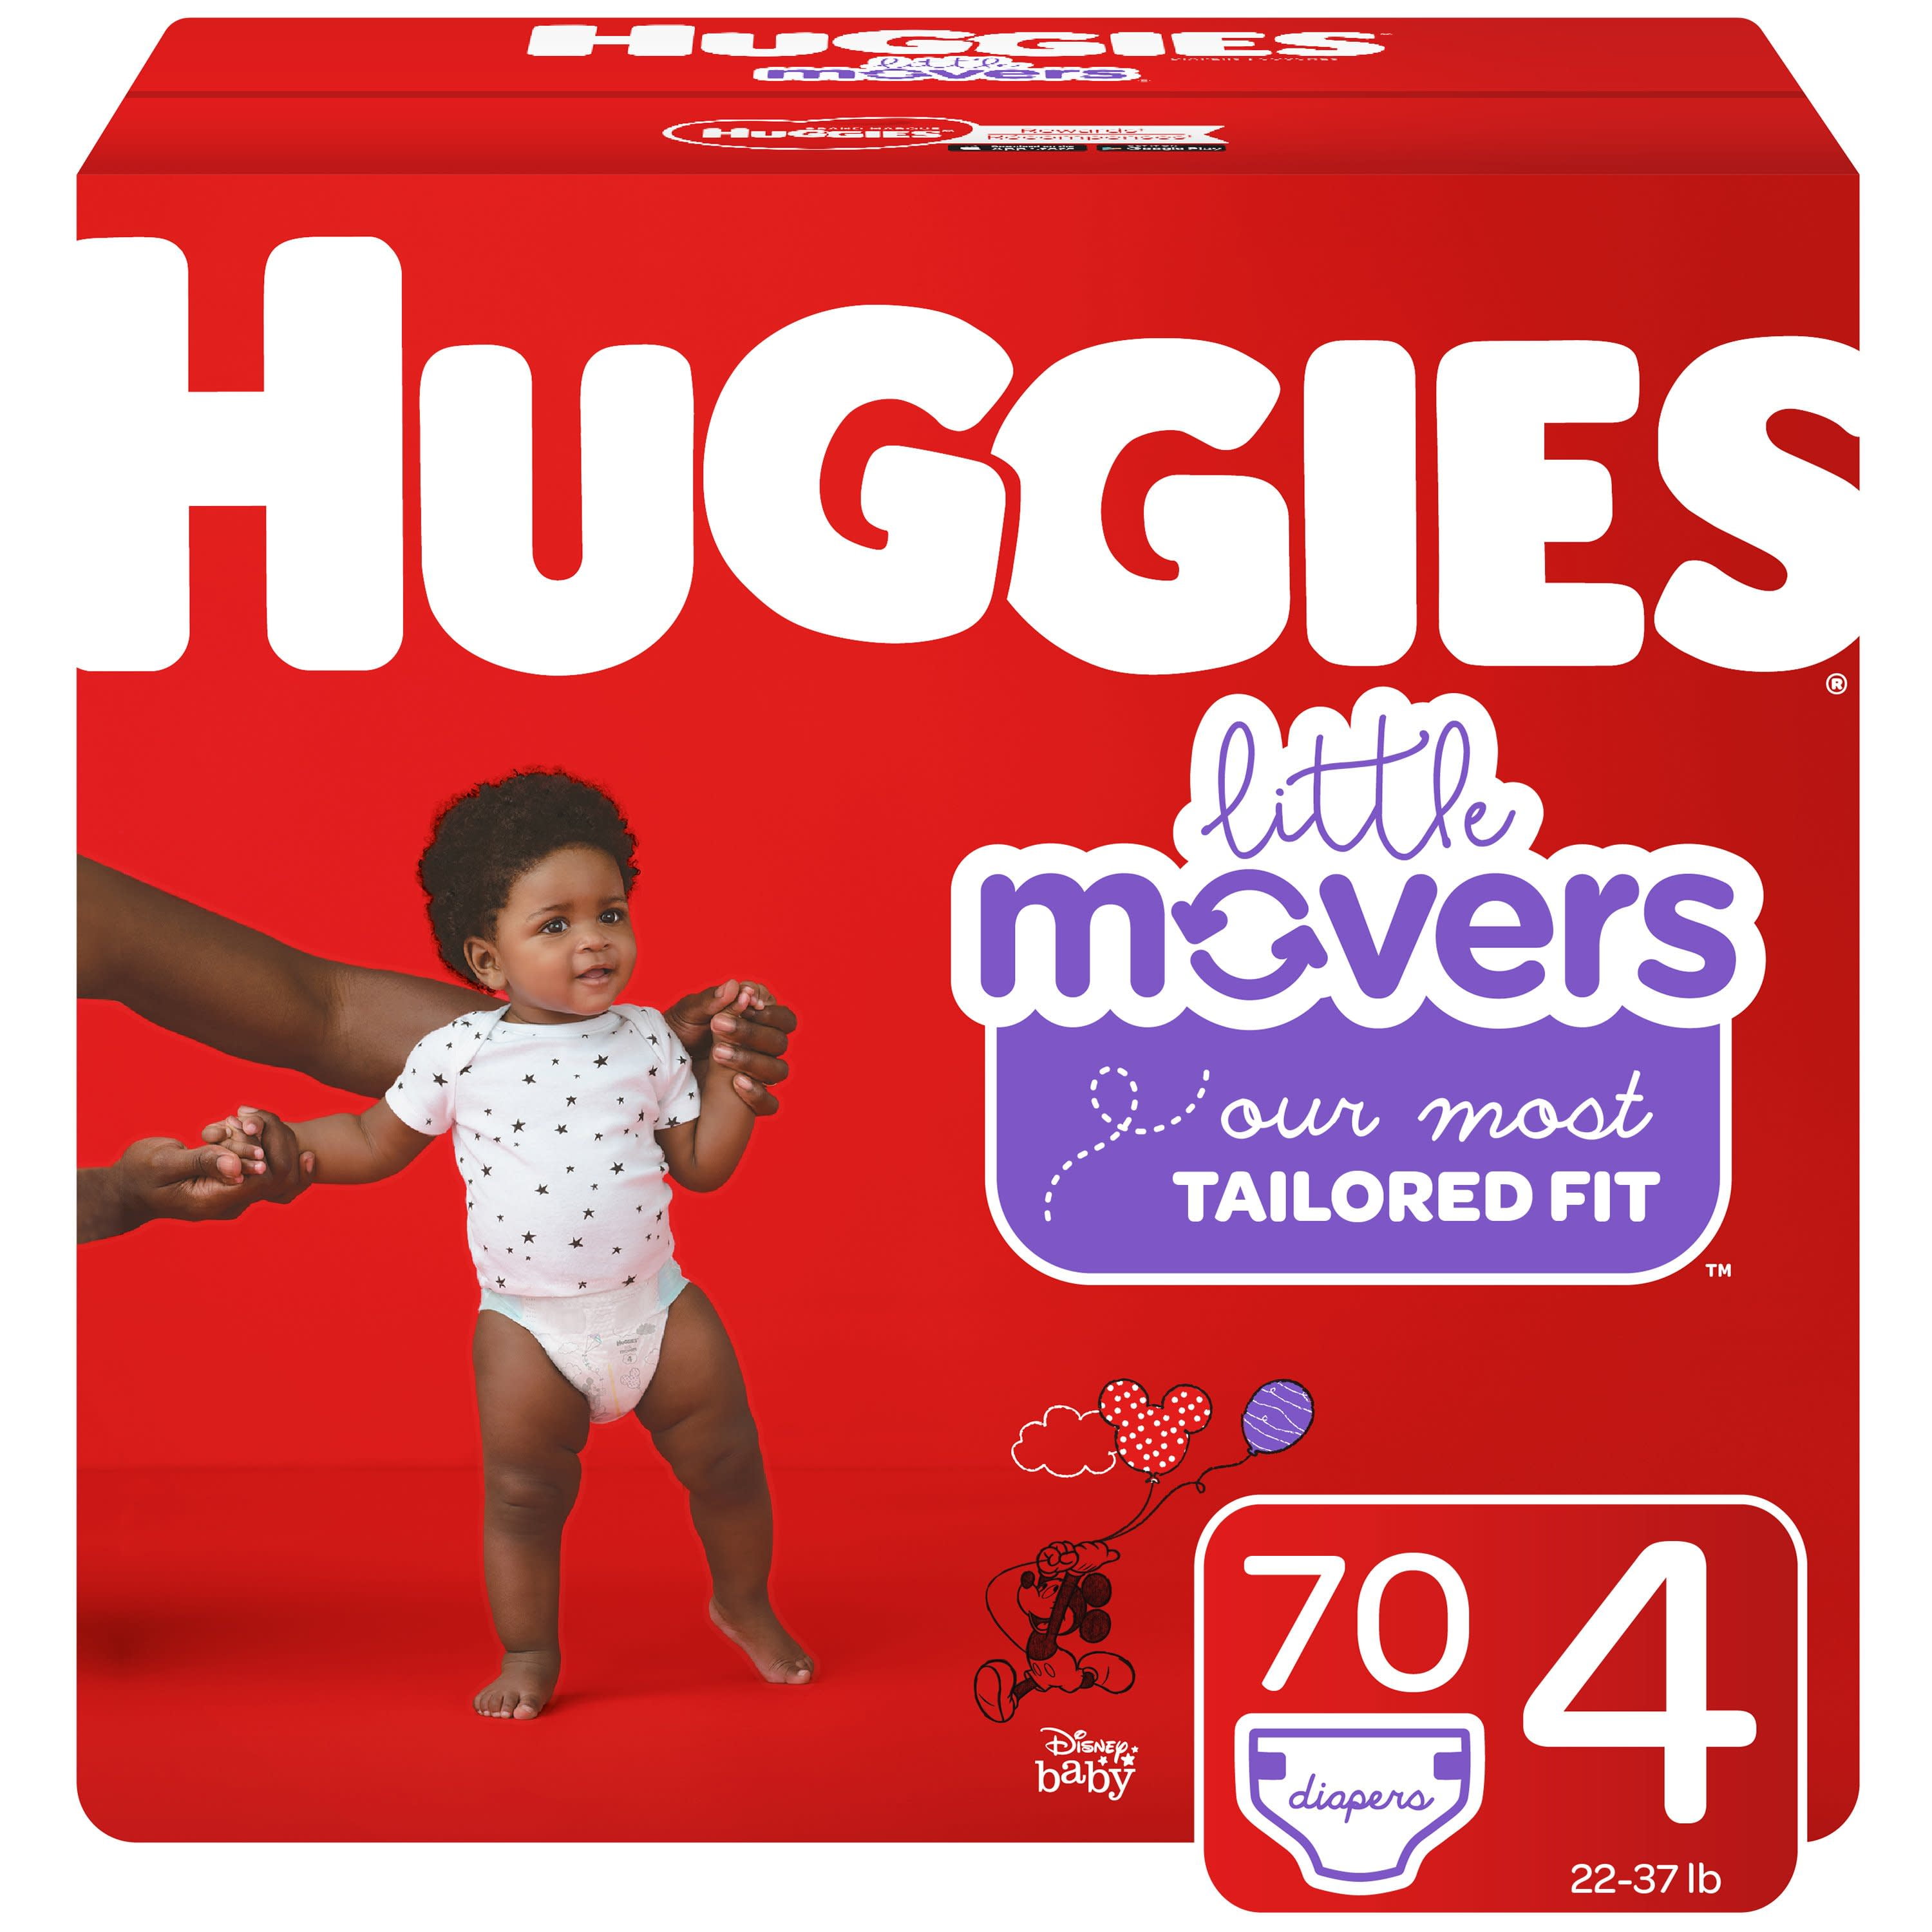 Brand NEW Huggies Little Snugglers Diapers Nappers 108 pieces Size N 